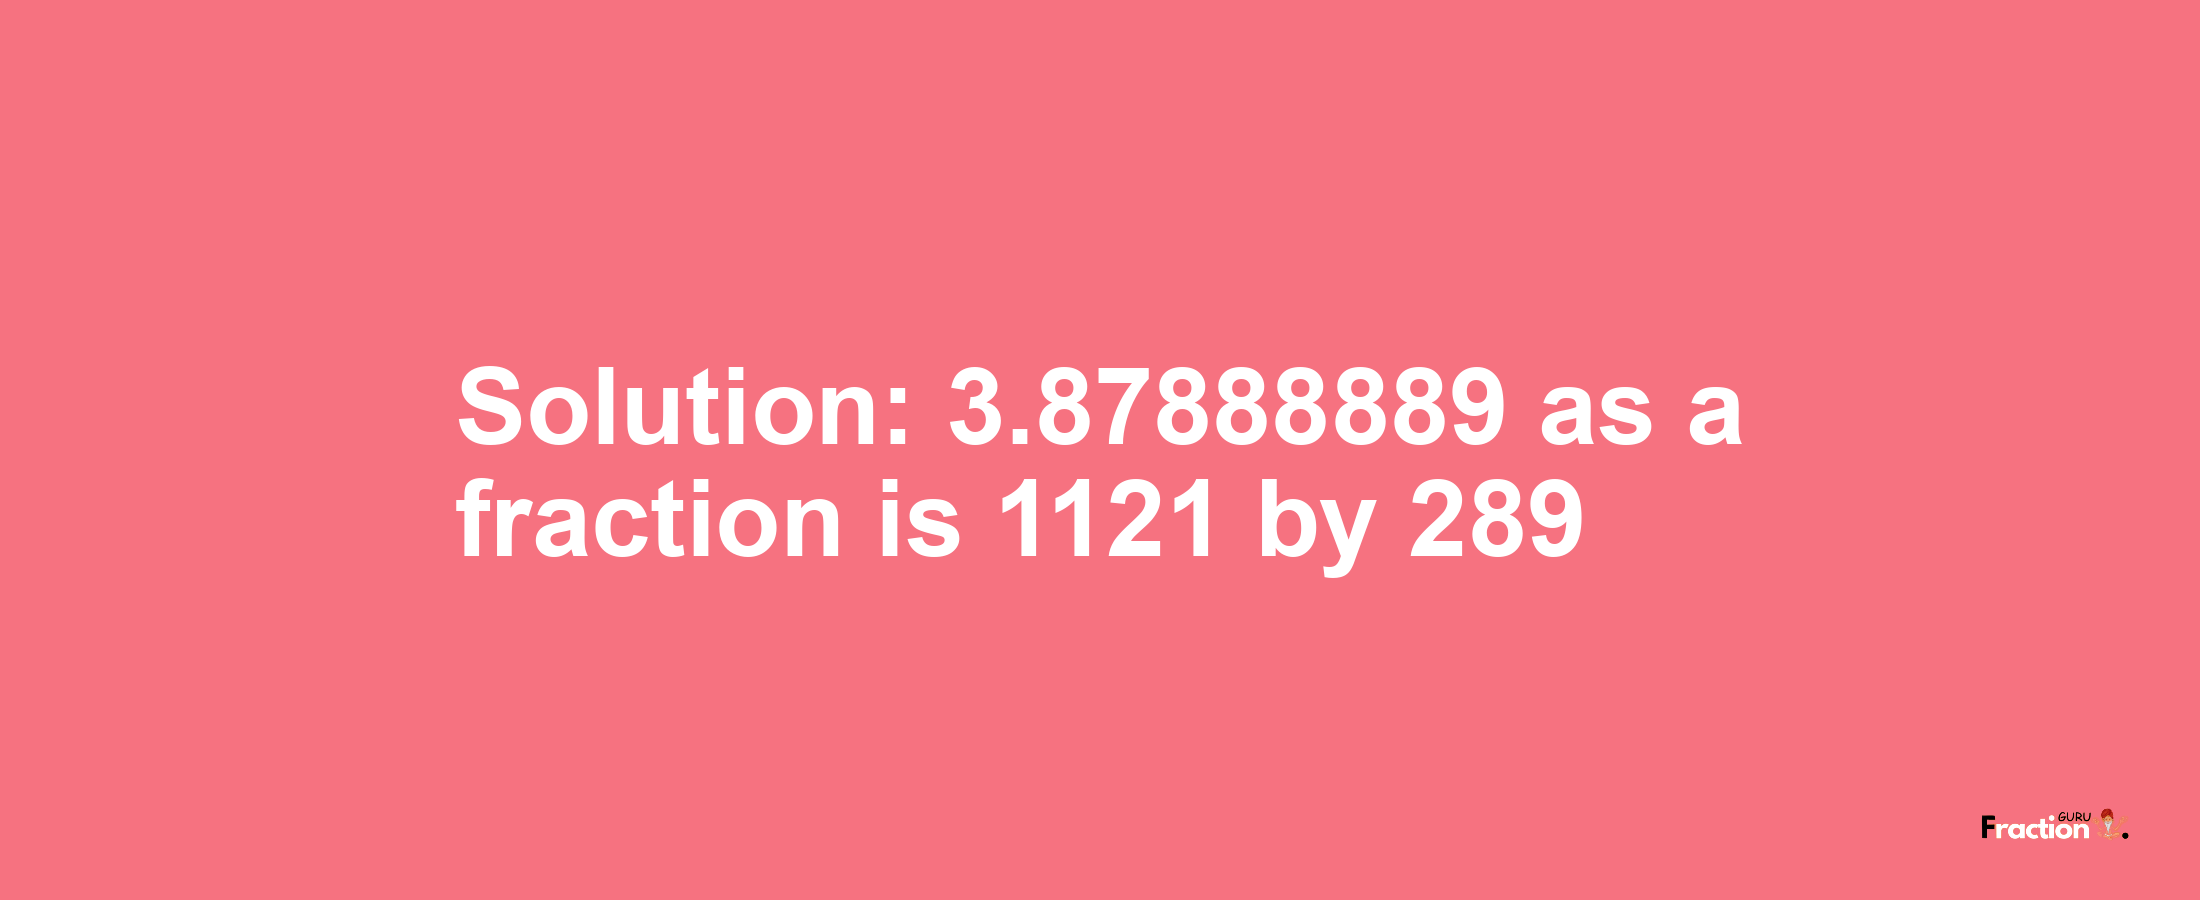 Solution:3.87888889 as a fraction is 1121/289